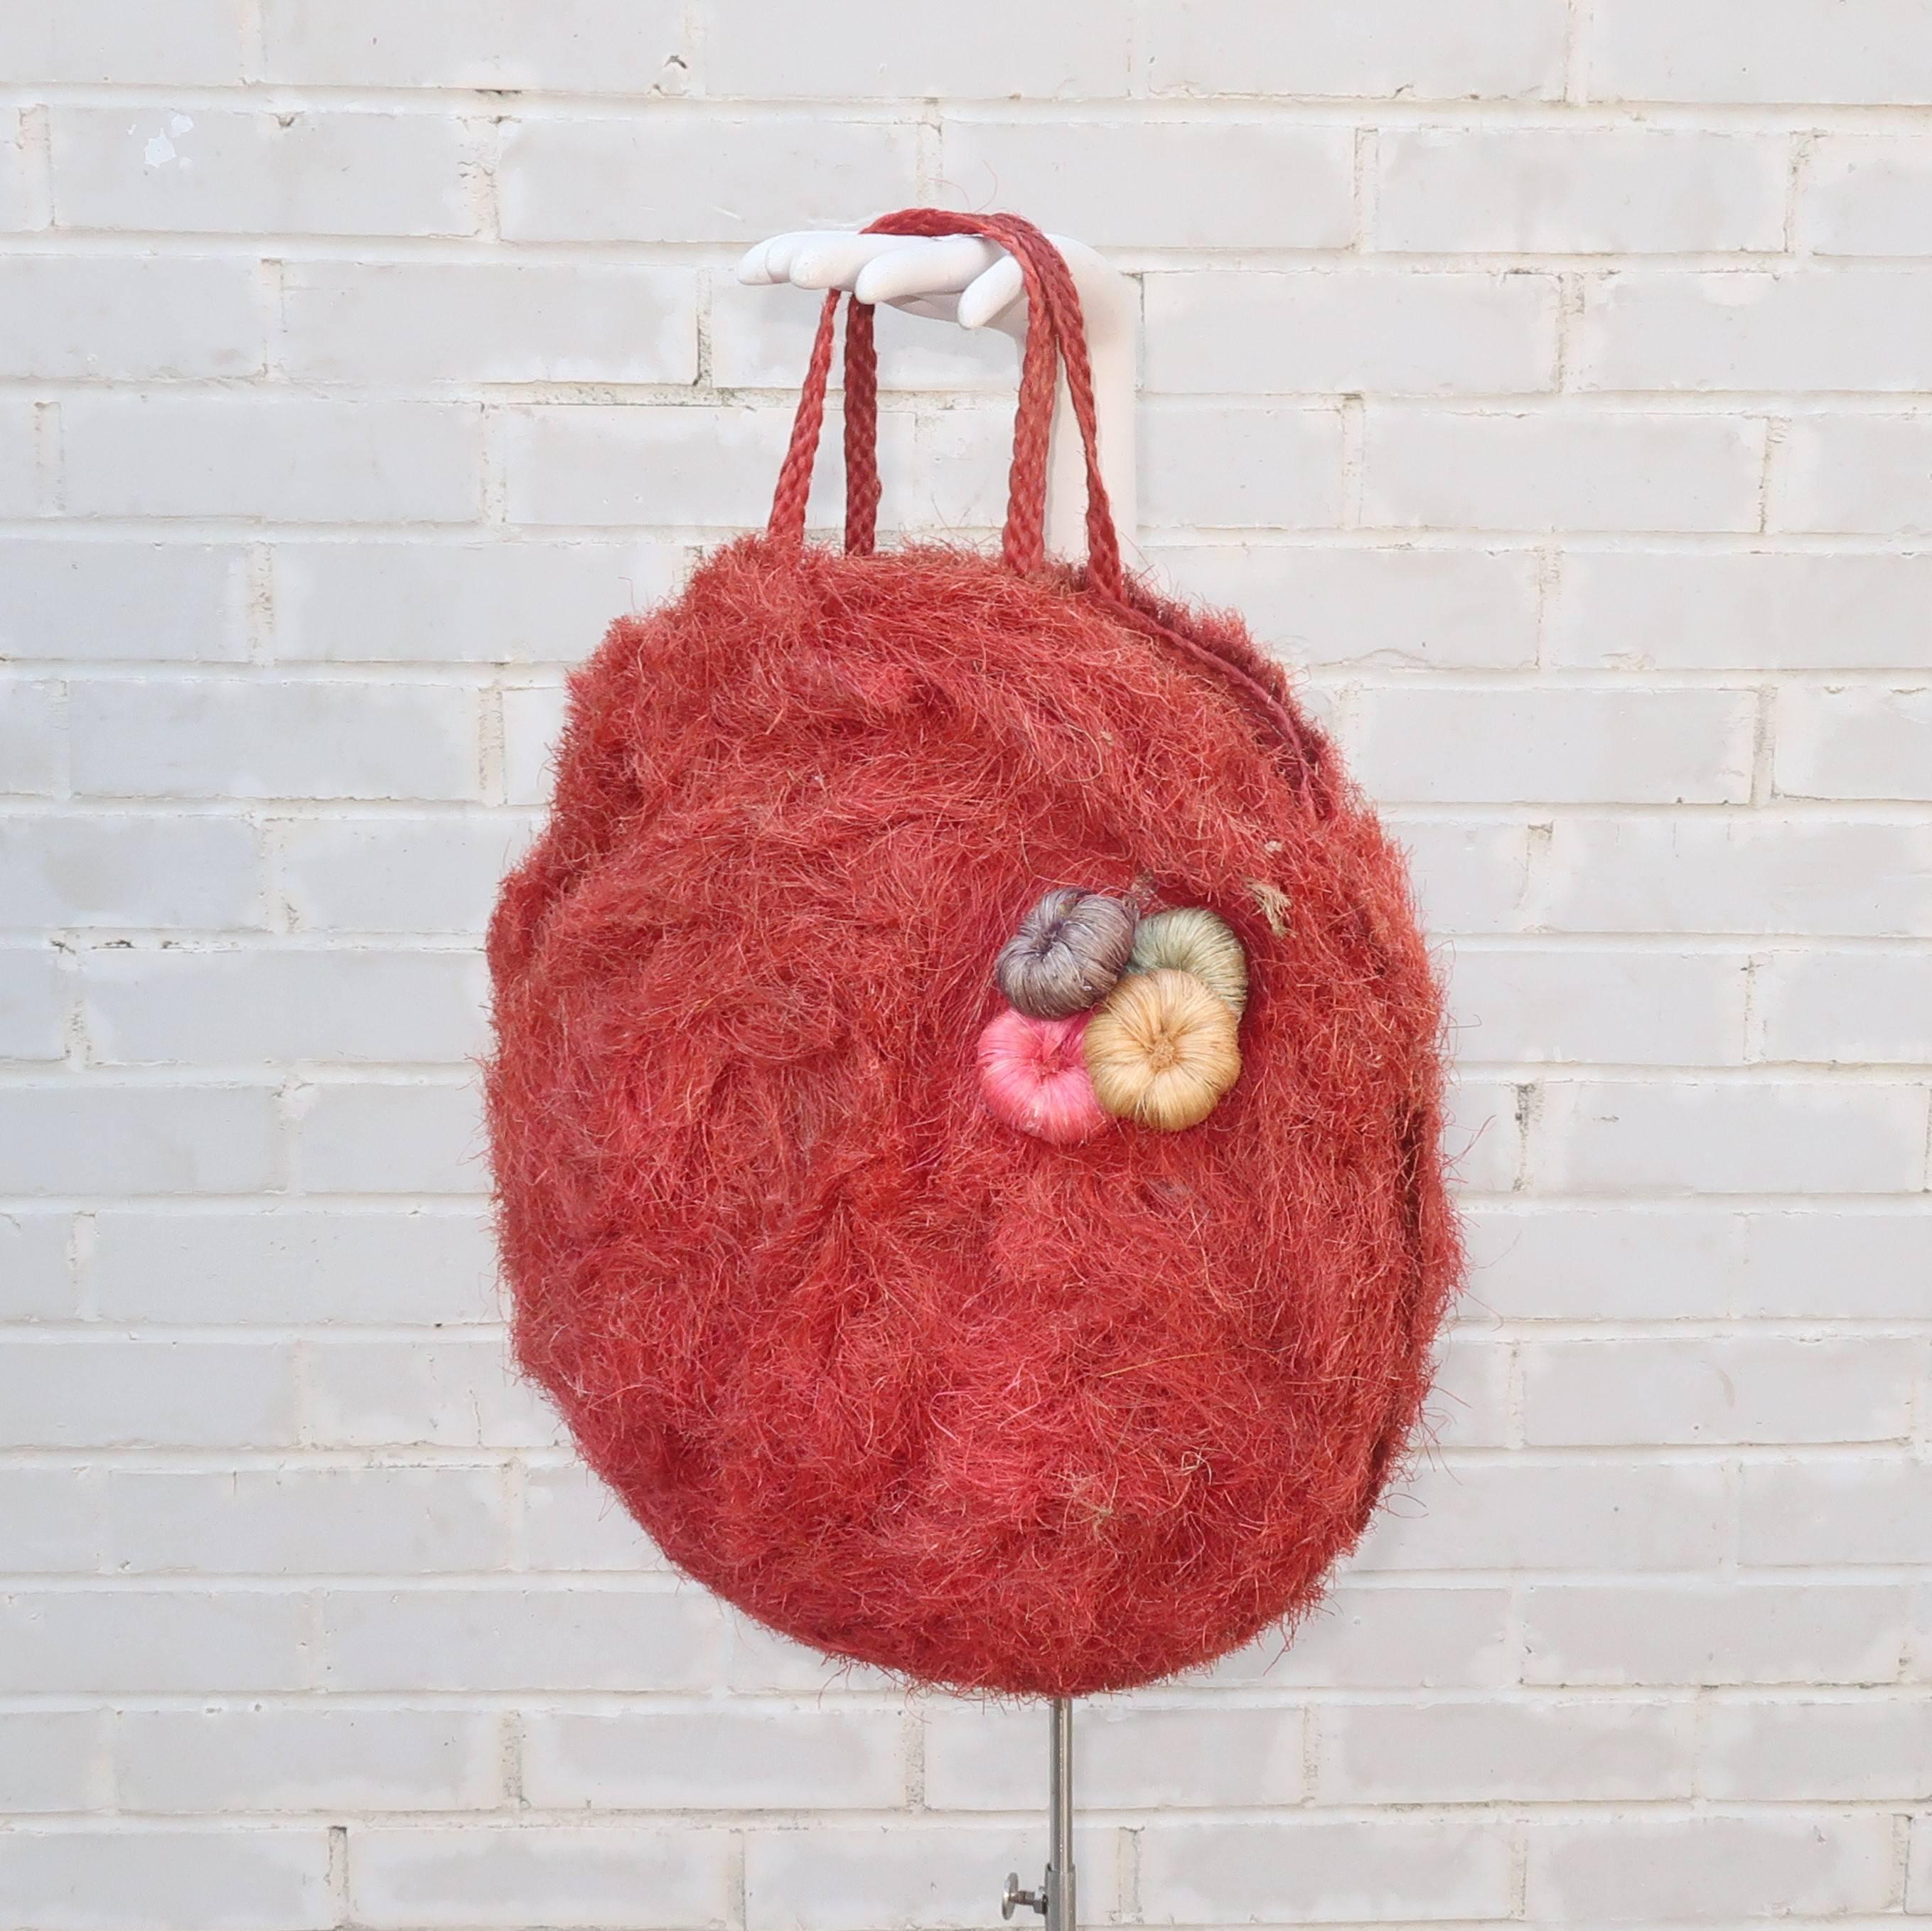 Step into summer with a fun and functional 1950's straw tote handbag.  The exotic design will transport you to the tropics with the body of the large handbag woven in coconut fibers that have the texture and look of straw colored a marvelous shade